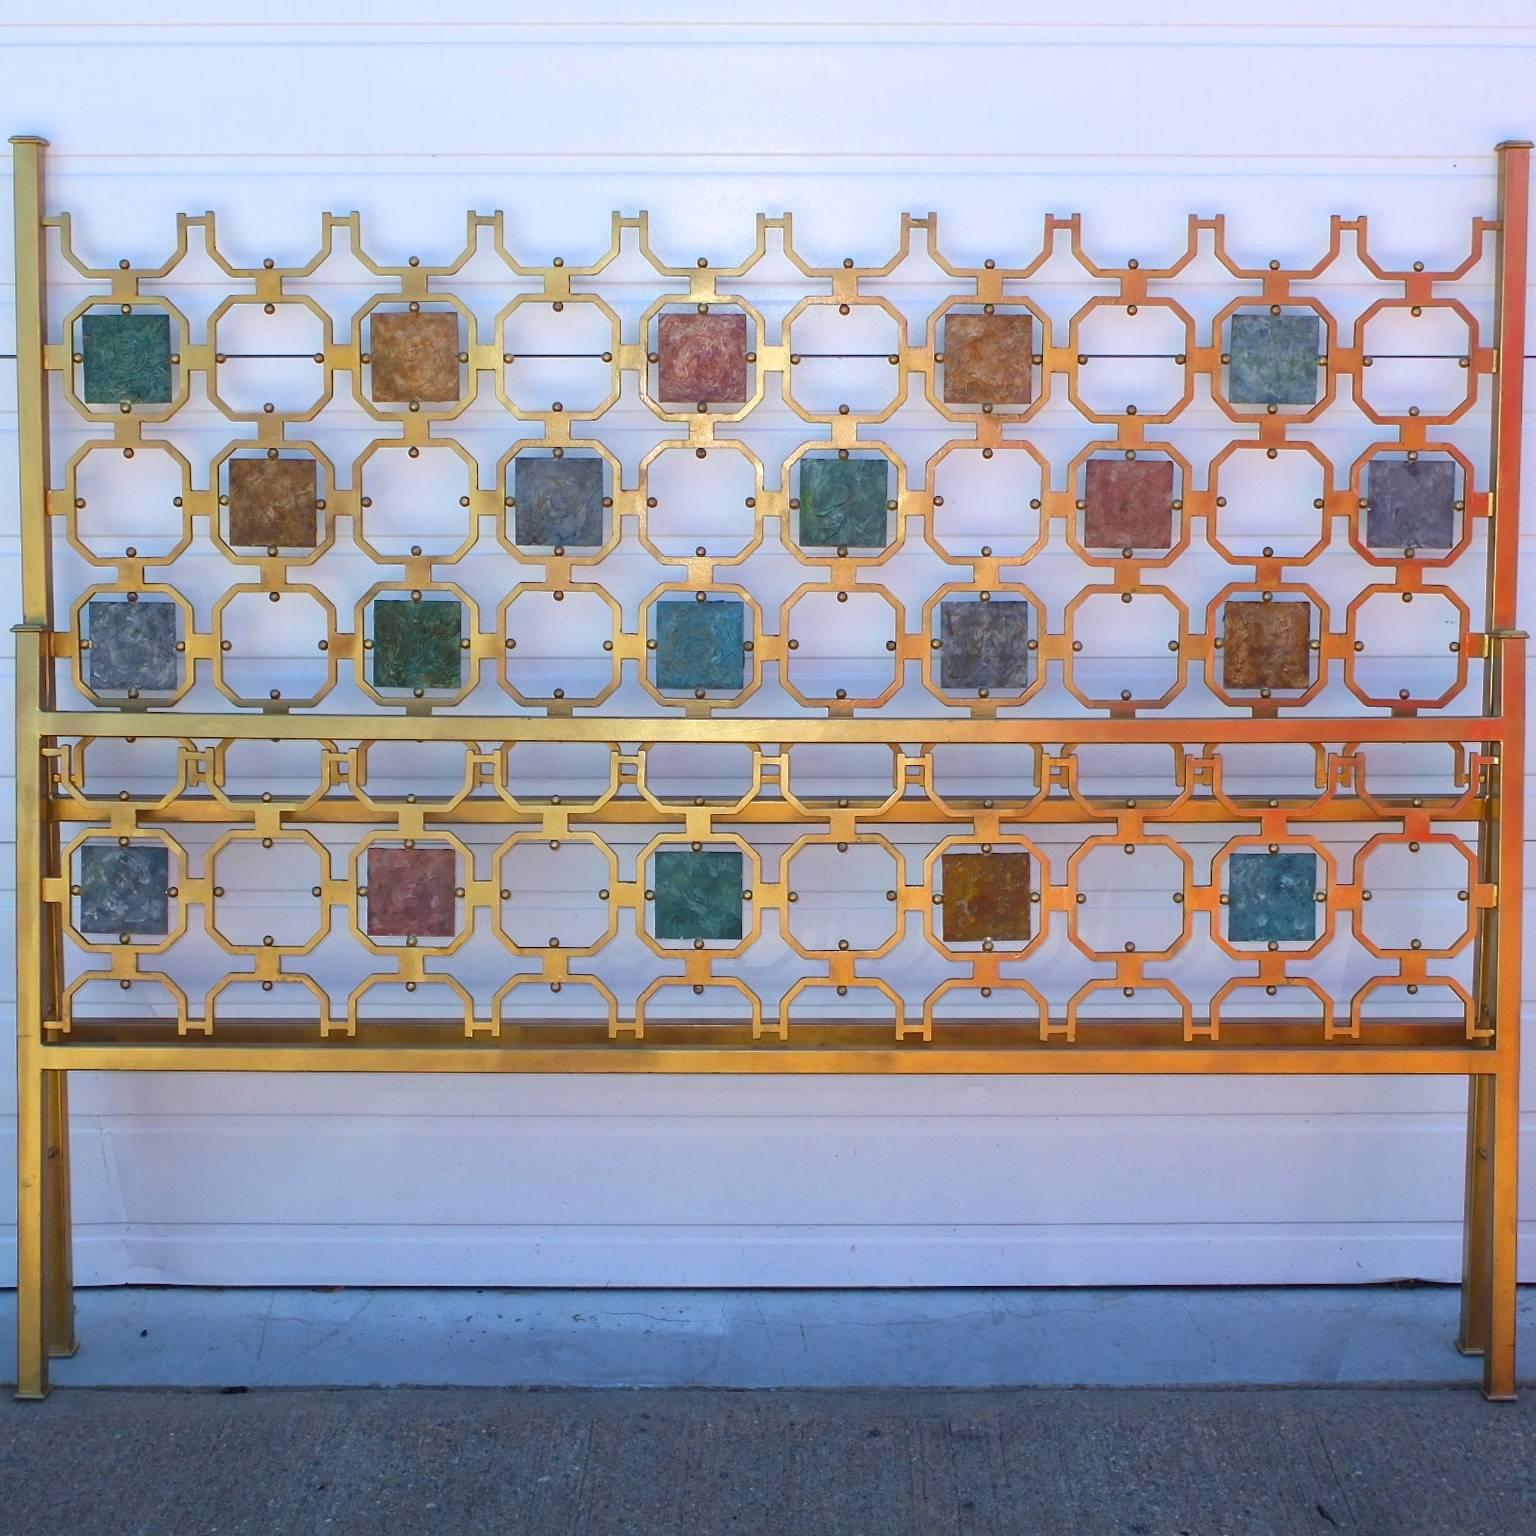 This is a 1950s, Italian bed (headboard and footboard) made in the style of the bronze beds by Arnaldo Pomodoro for Arredamento Borsani.

This bed is made of gilt iron and the ornaments are textured and colored metal squares.

Protruding from